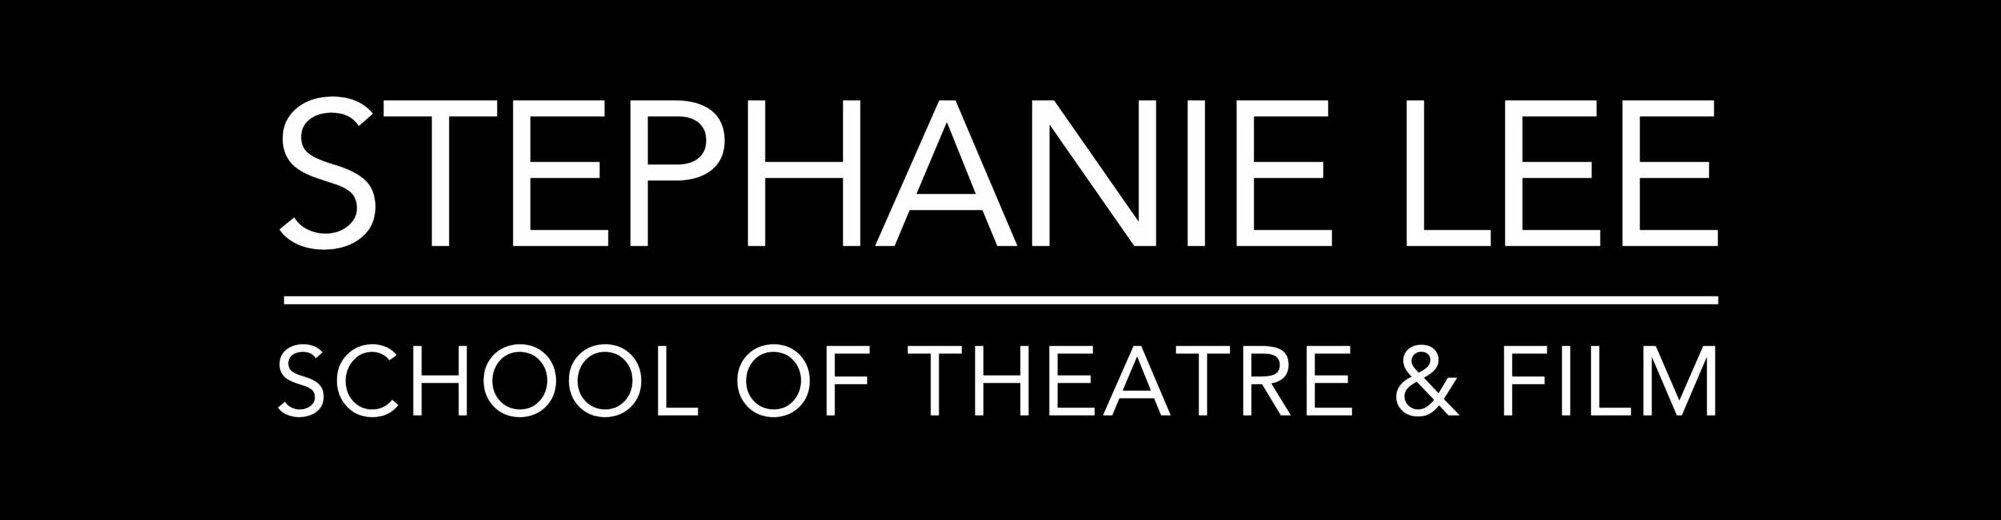 Stephanie Lee School of Theatre and Film